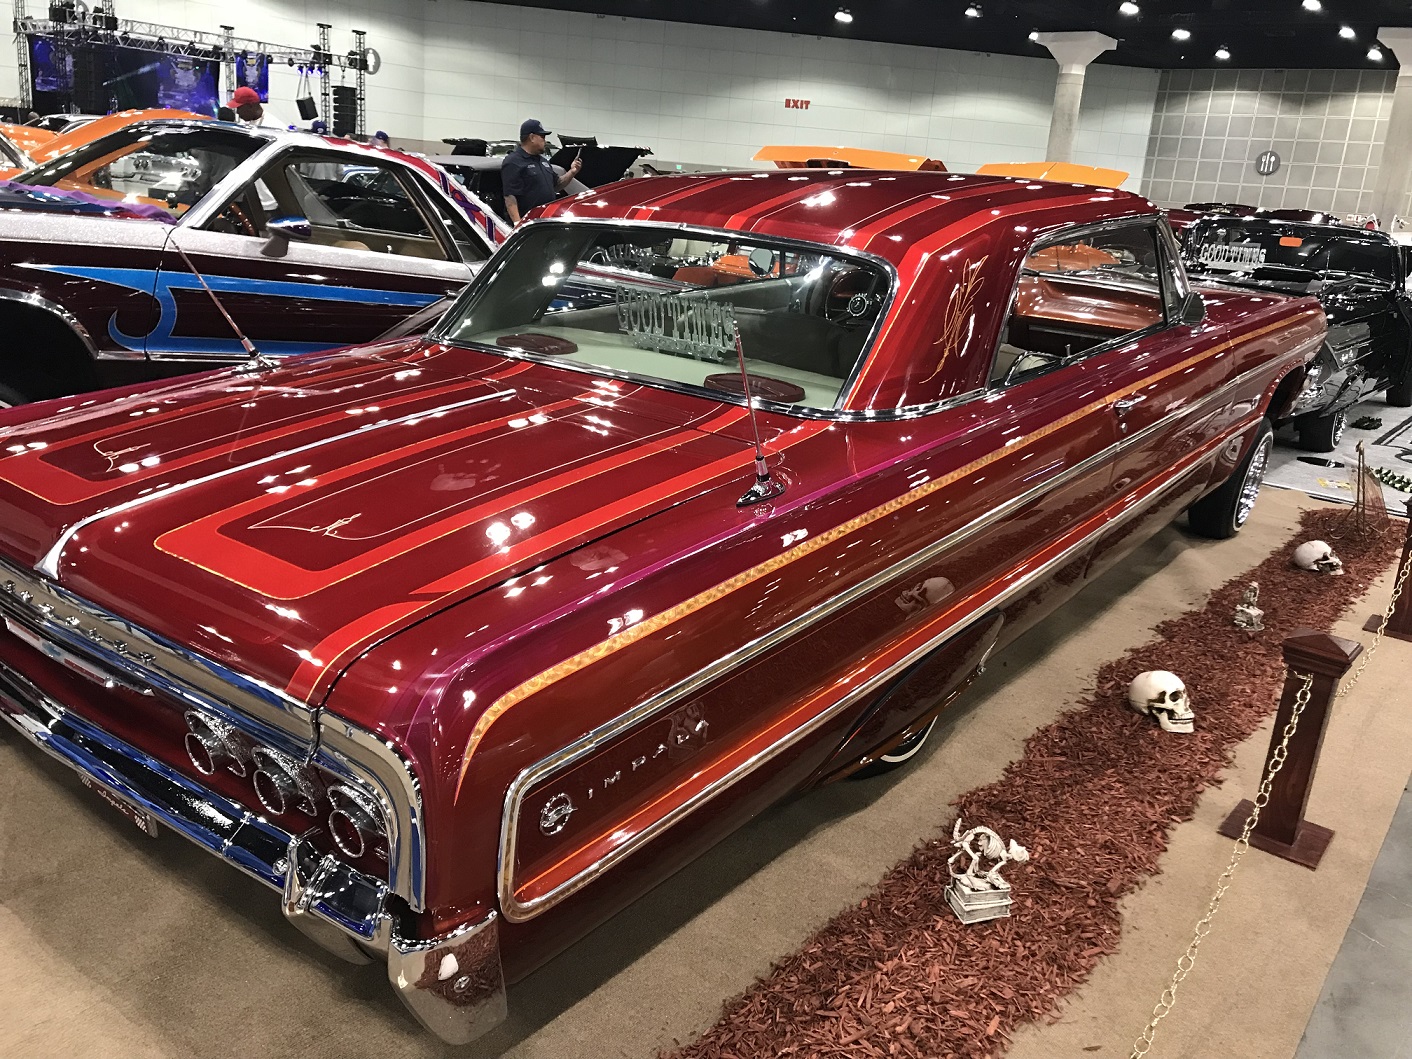 Lowrider Cars Are About Pride, Family, And Community